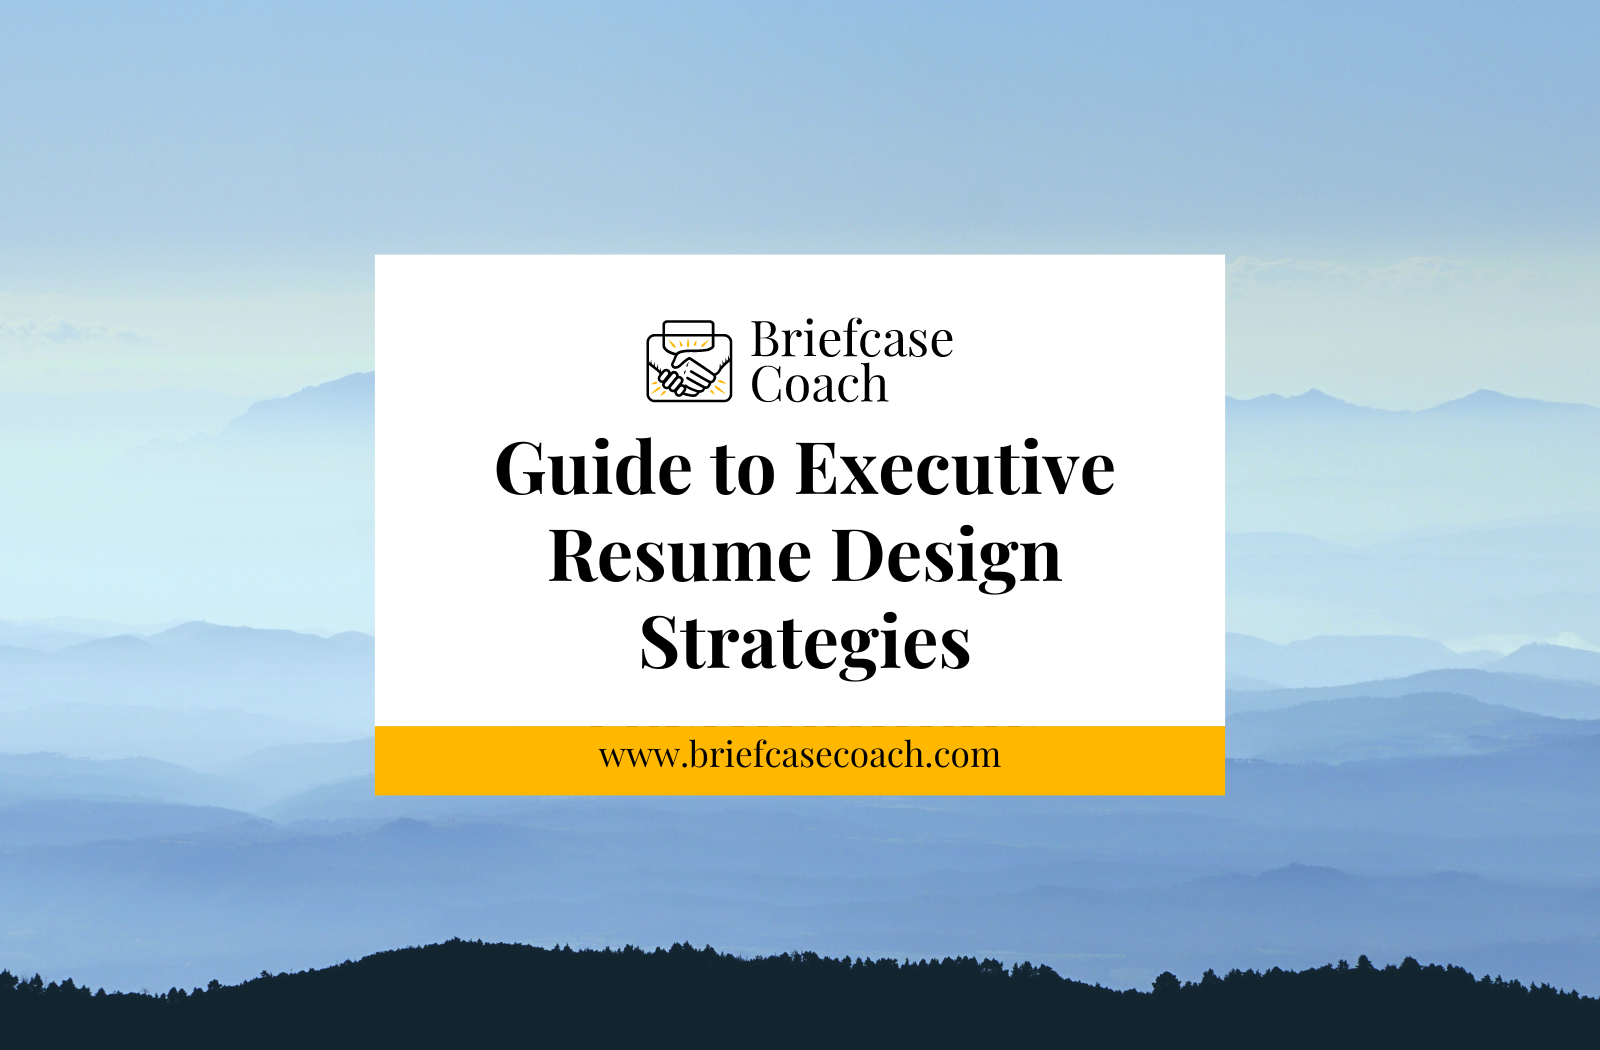 Guide to Executive Resume Design Strategies